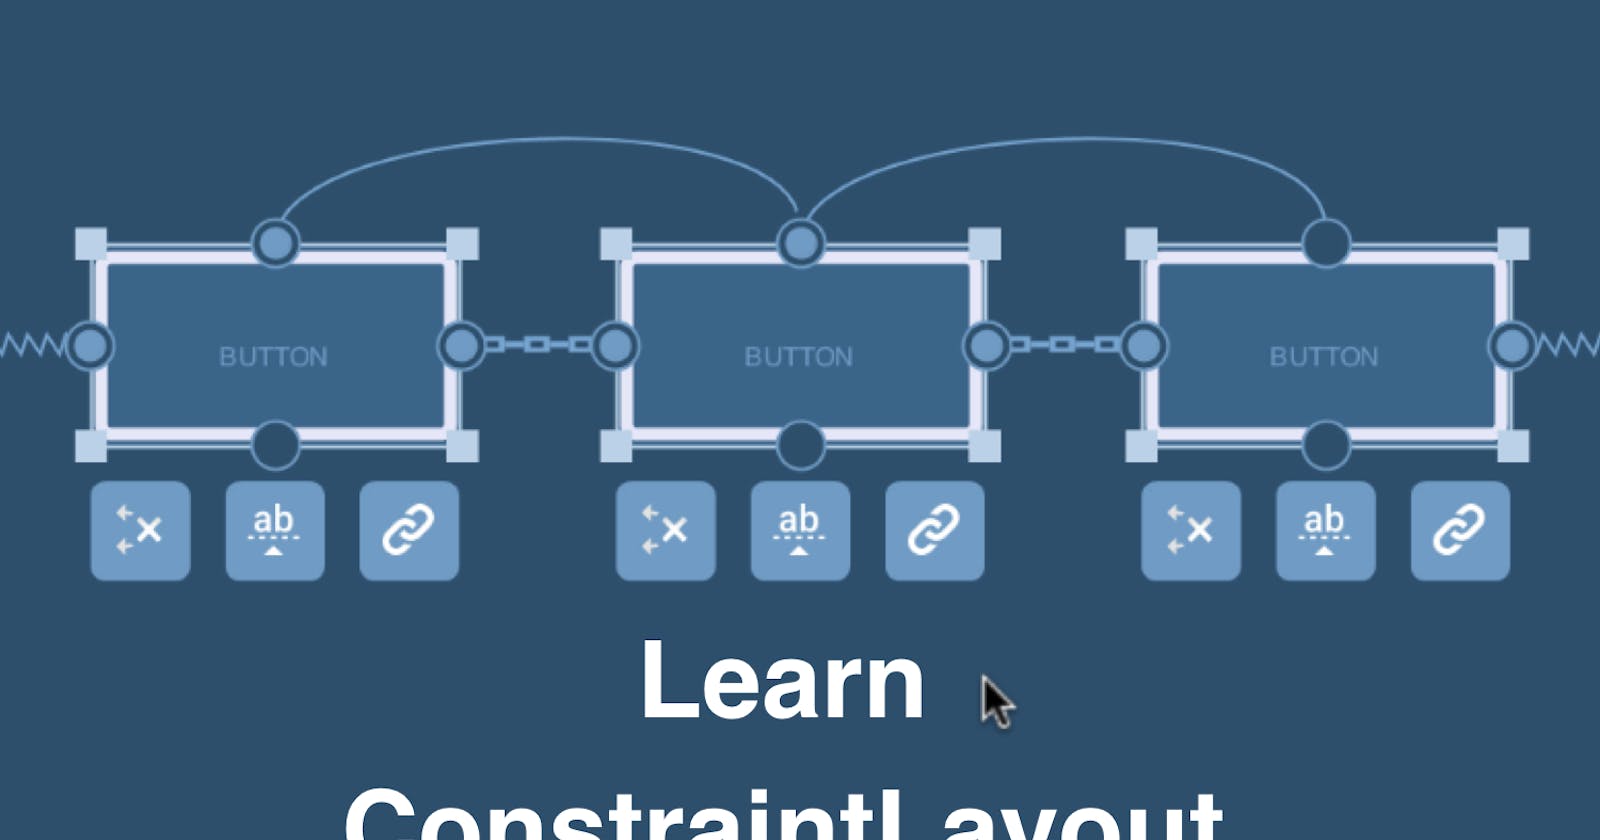 UnderStanding how constraint Layout works in android development